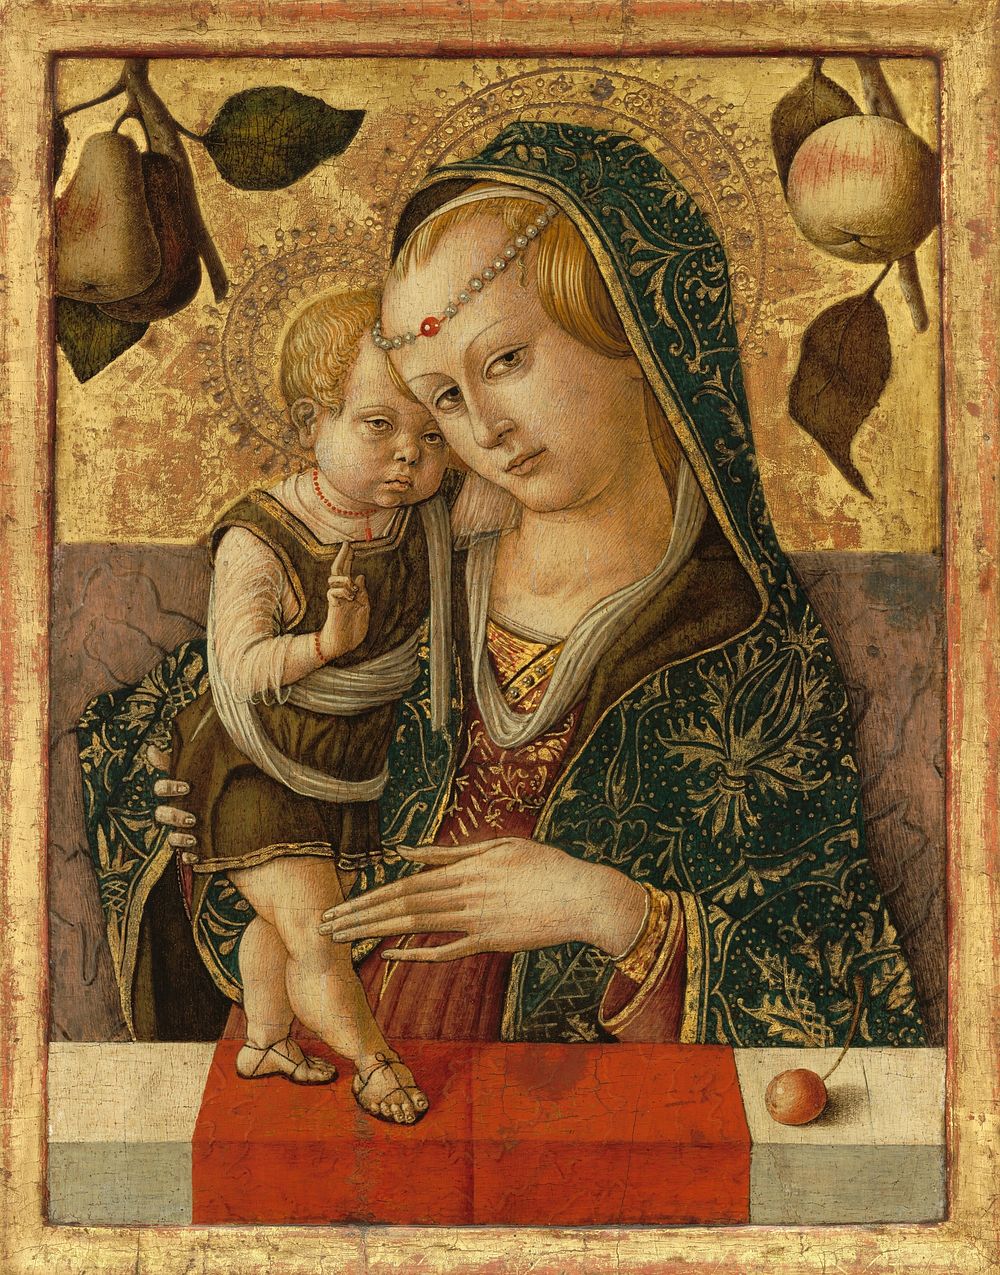 Madonna and Child (ca. 1490) by Carlo Crivelli.  